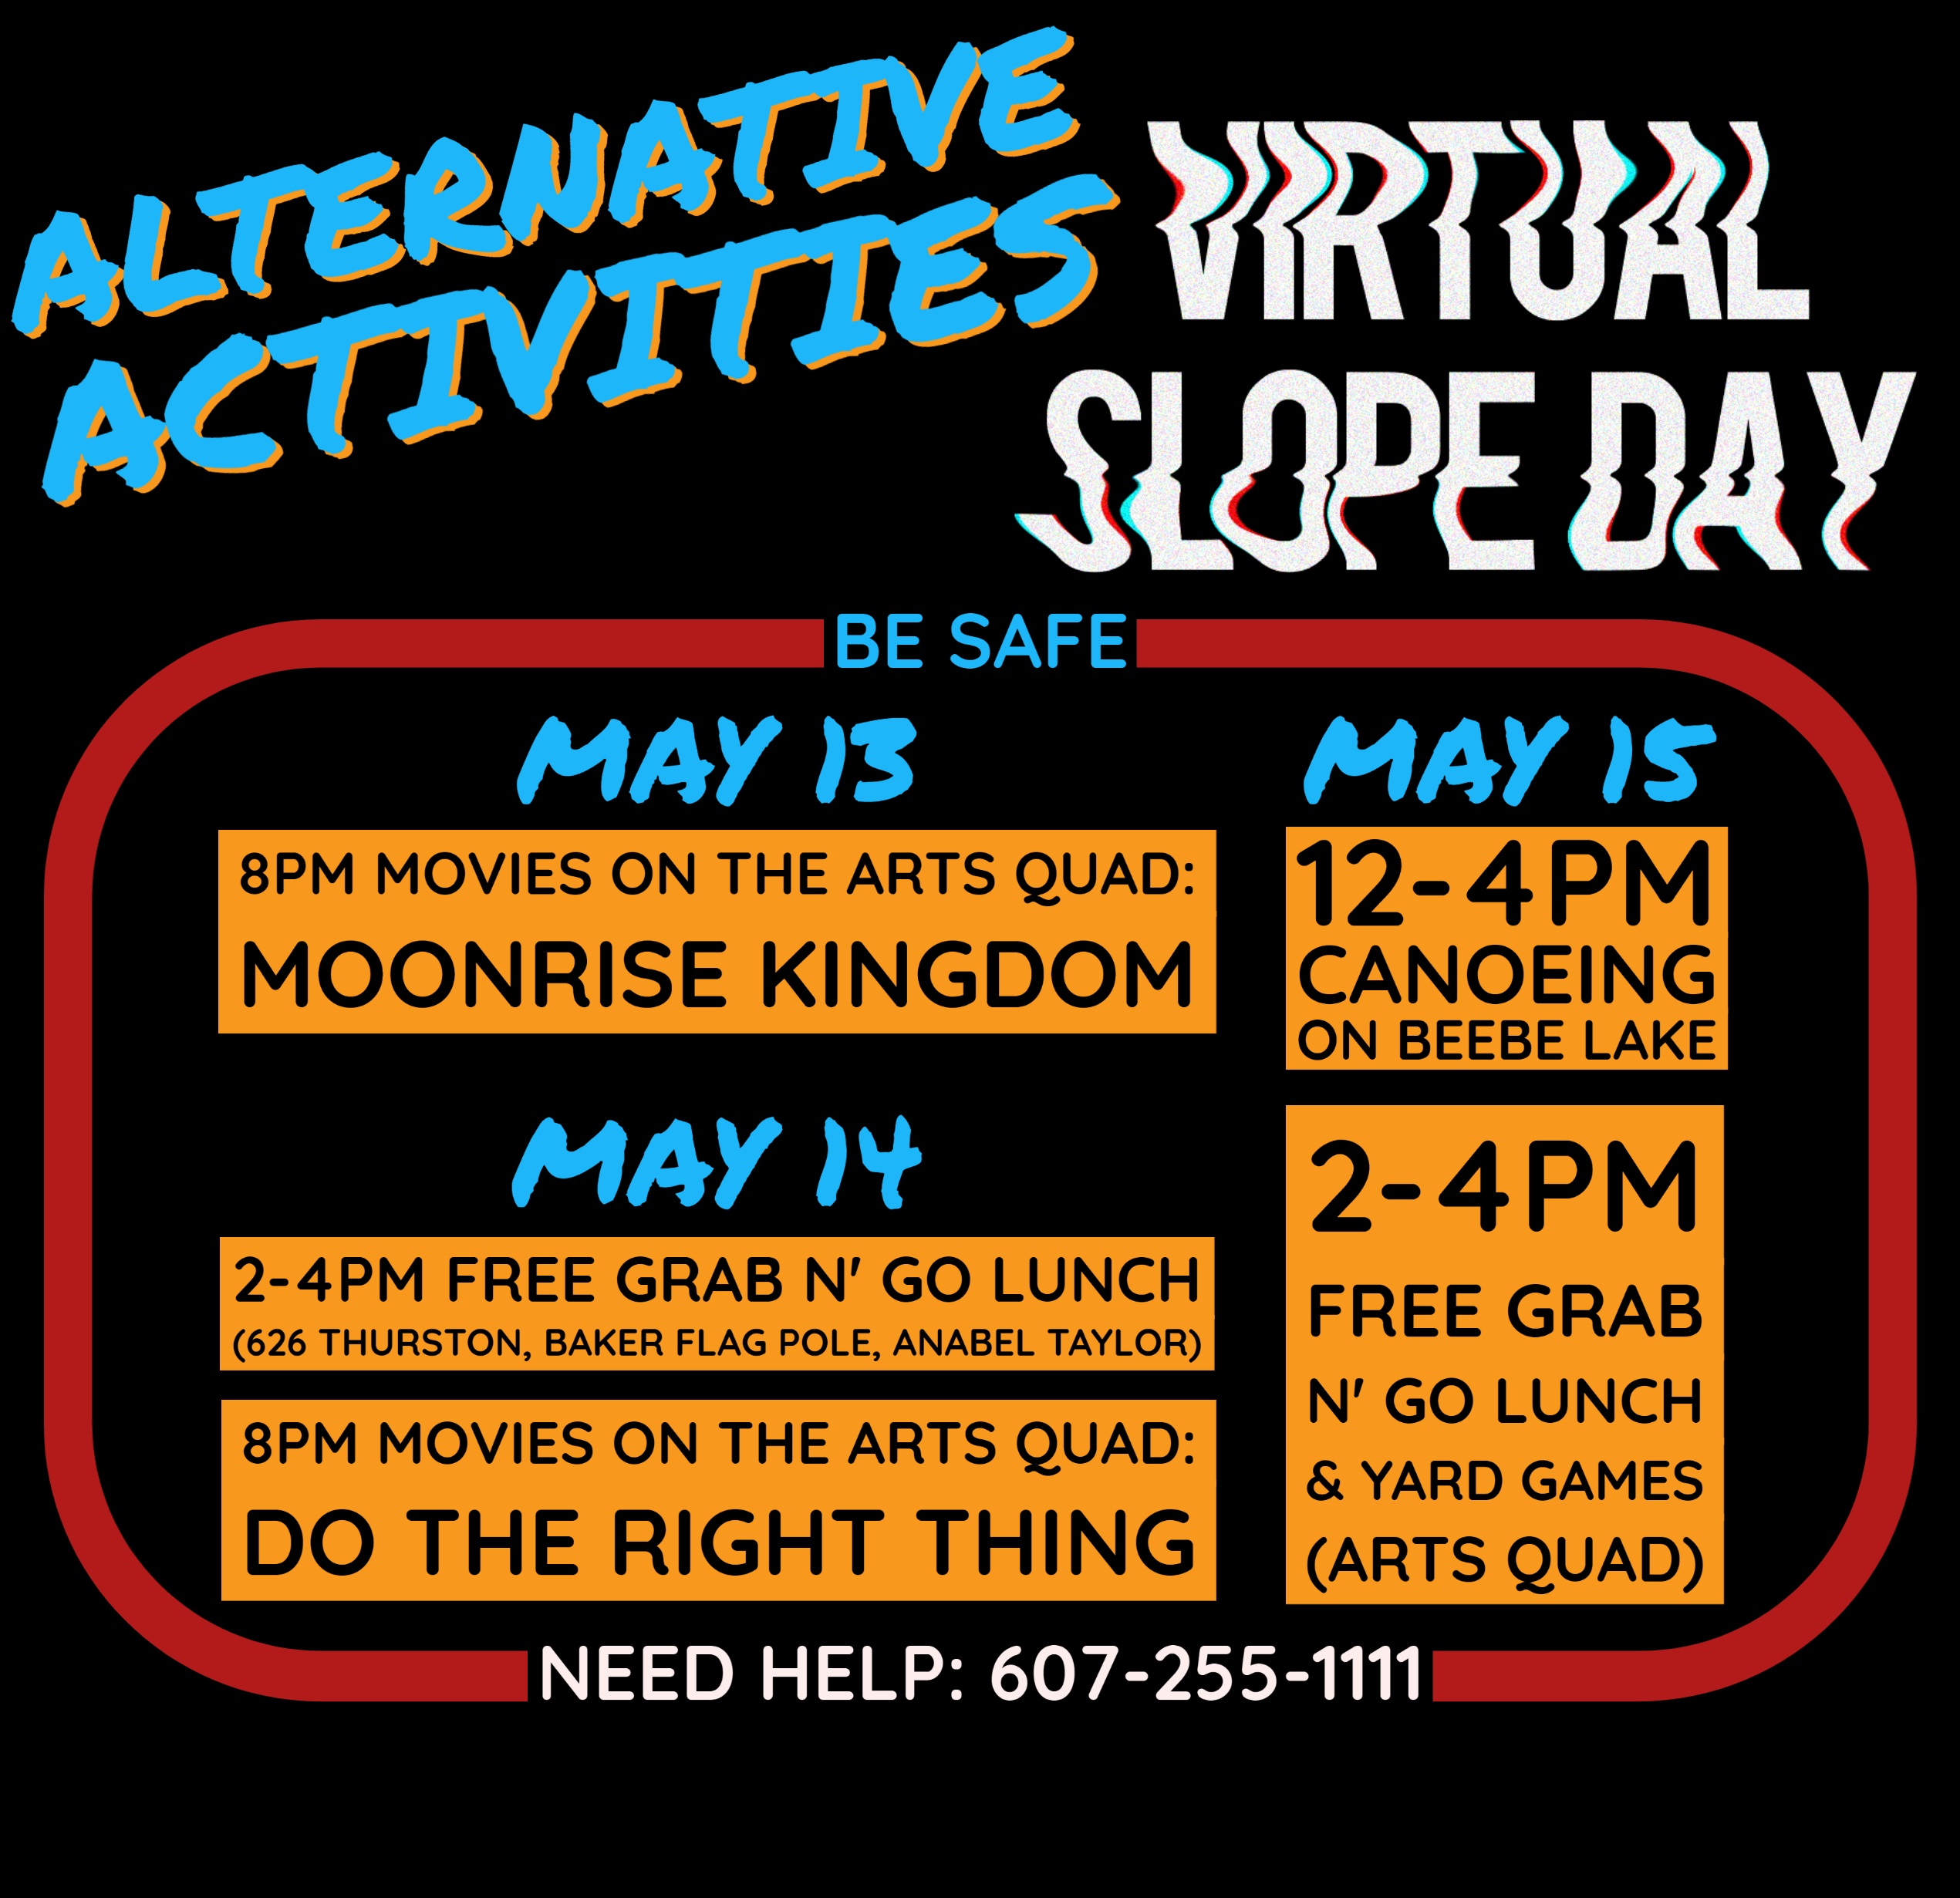 Virtual Slope Day Alternative Activities Student & Campus Life